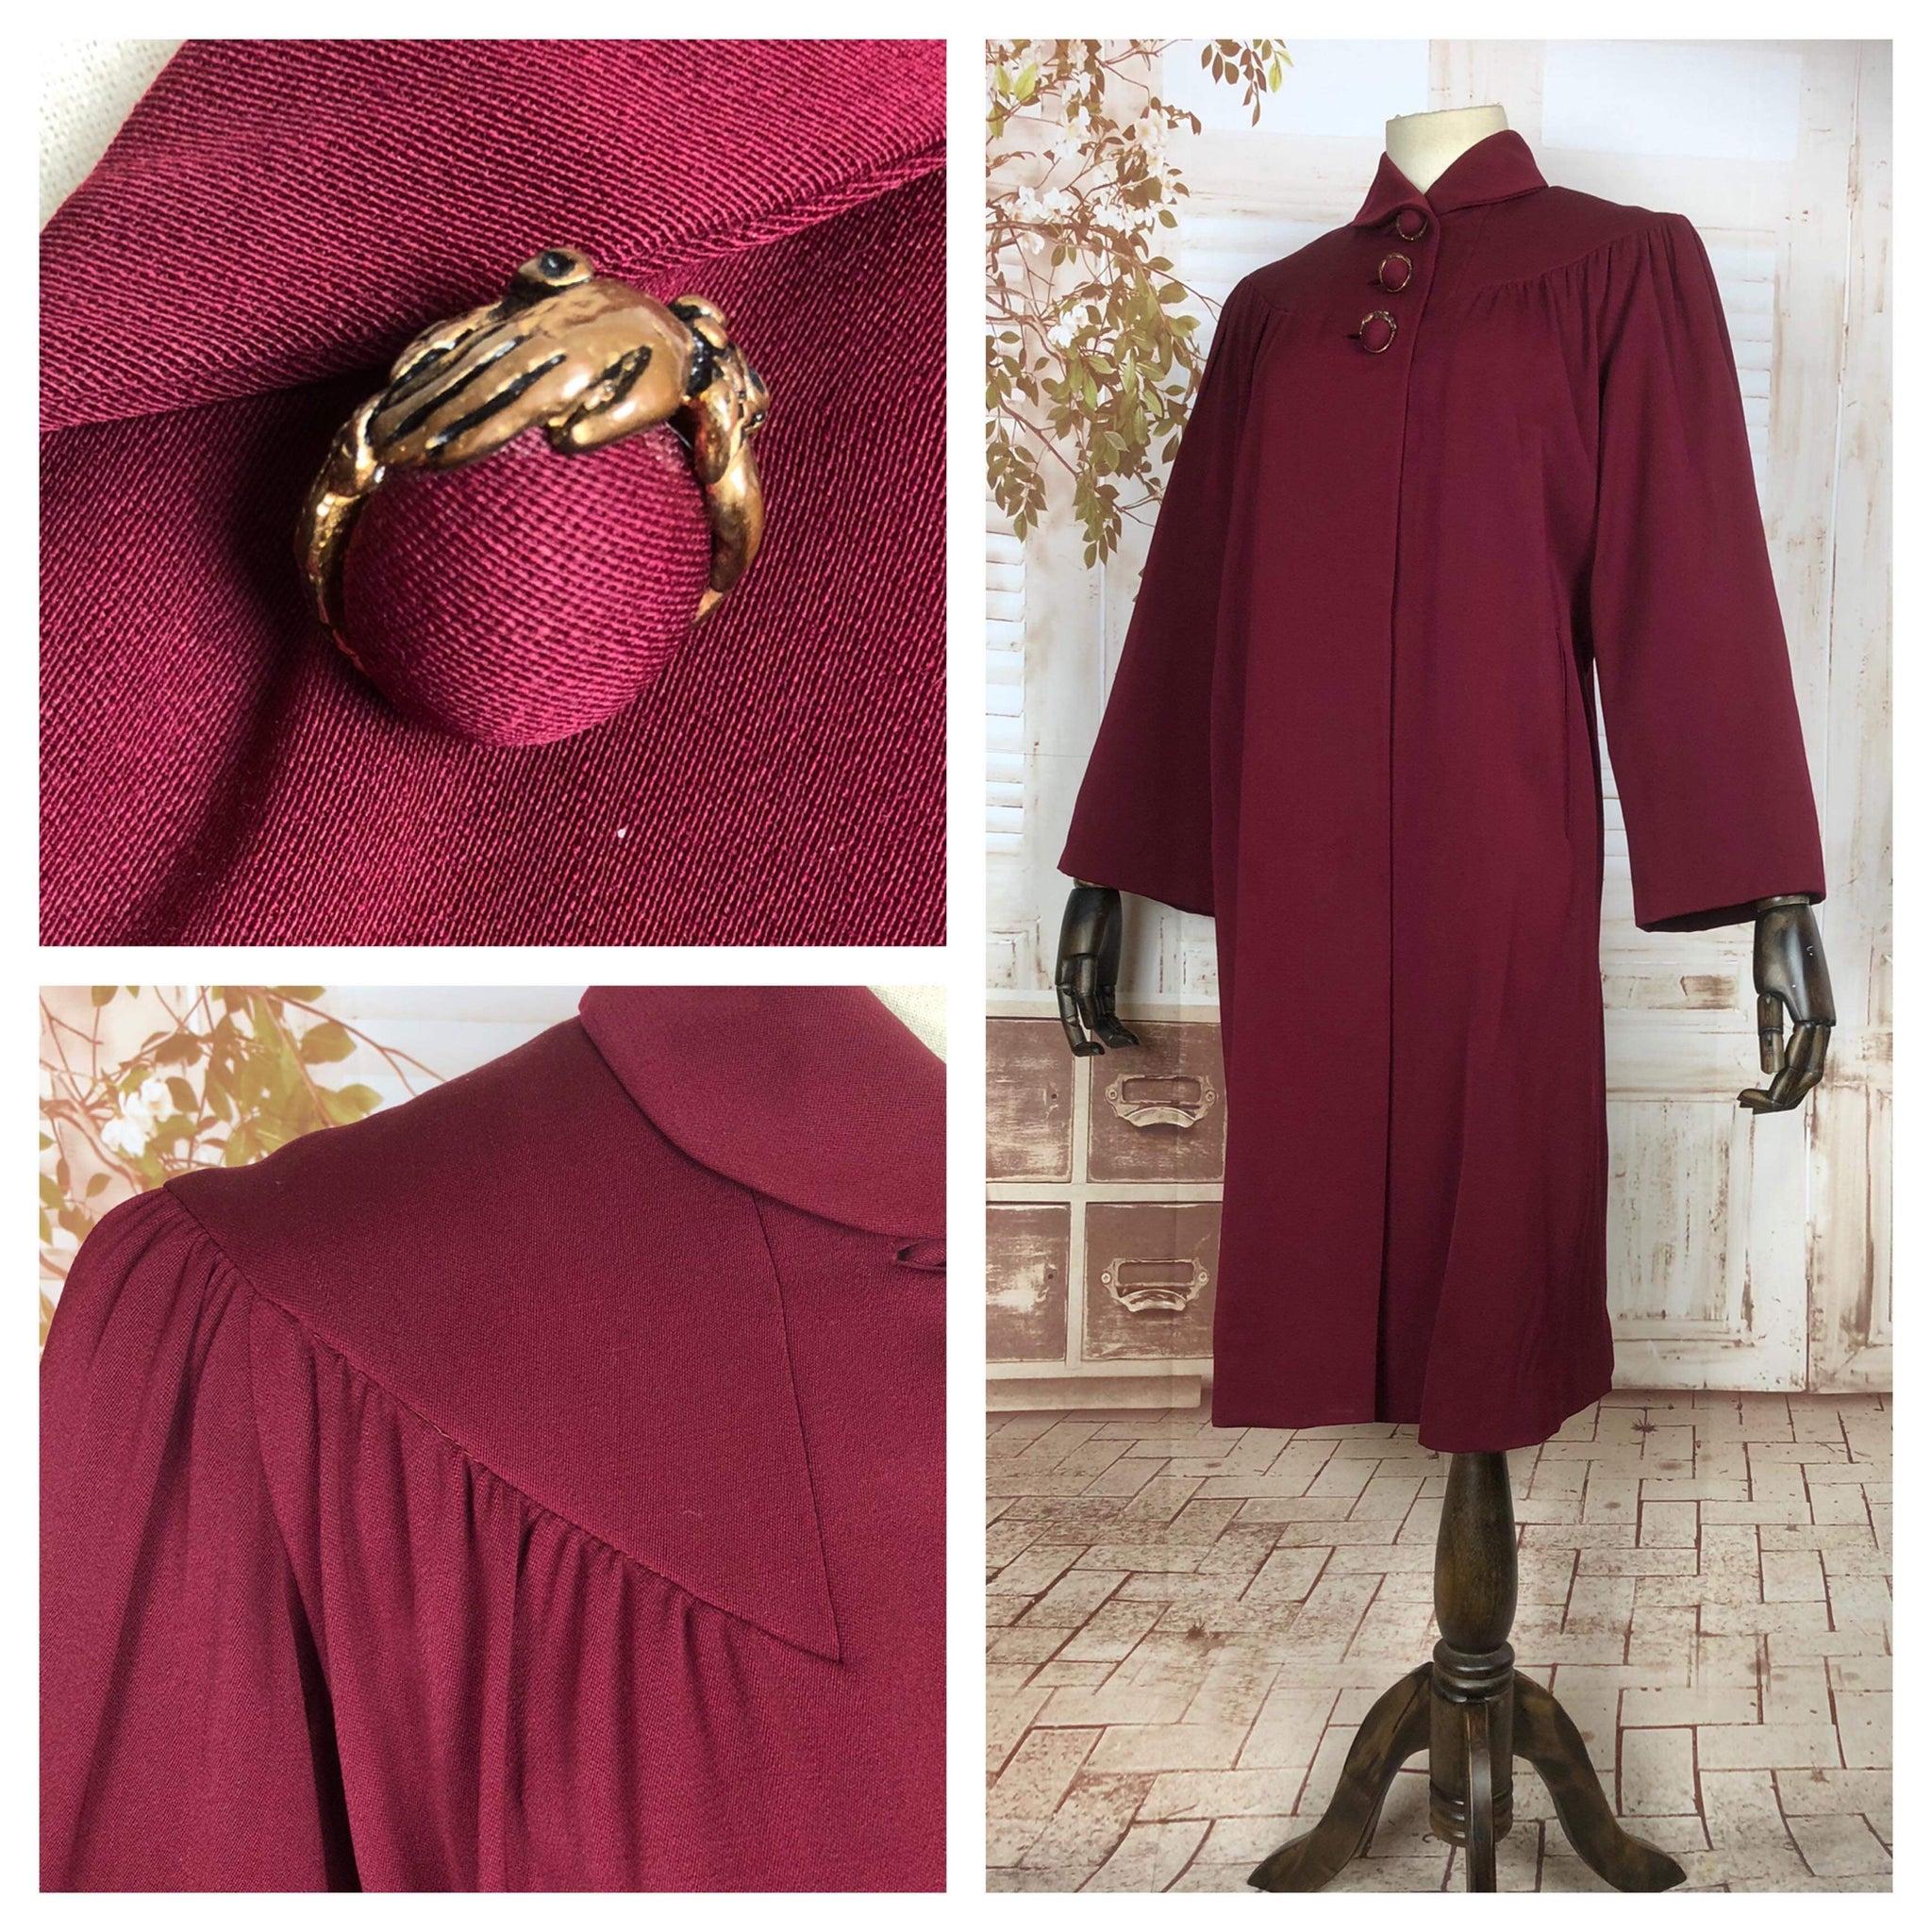 Incredible Original Late 1930s / Early 1940s Burgundy Swing Coat With incredible Hand Buttons